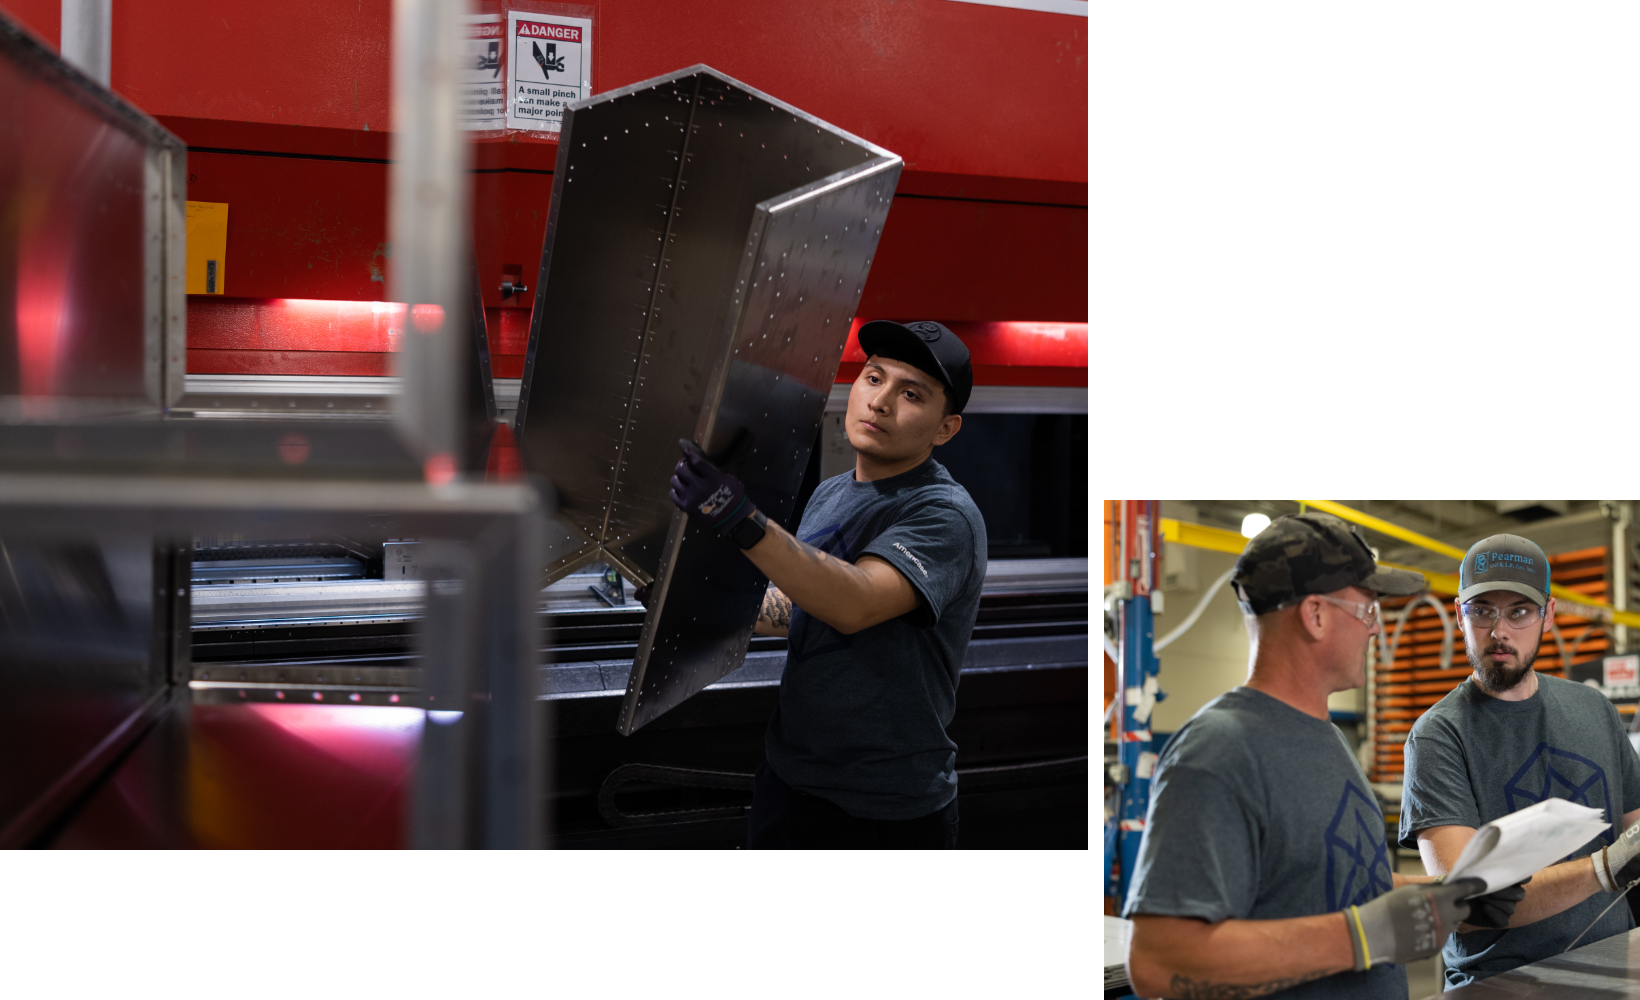 (Left) Americase employee carrying a large piece of custom metal covering to be used in a case being built. (Right) Two Americase employees talking in a warehouse.